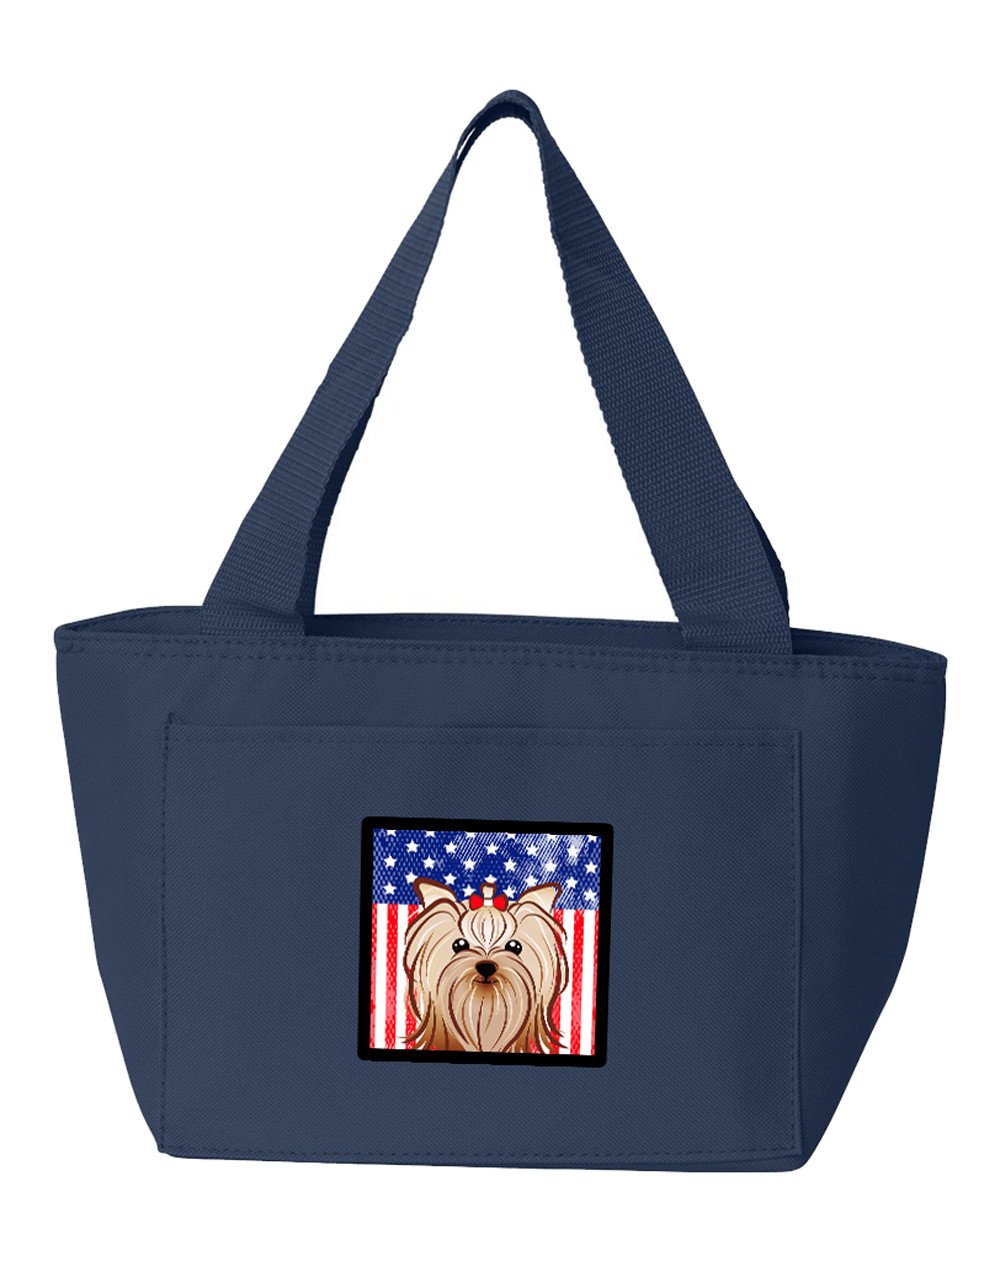 American Flag and Yorkie Yorkishire Terrier Lunch Bag BB2134NA-8808 by Caroline's Treasures